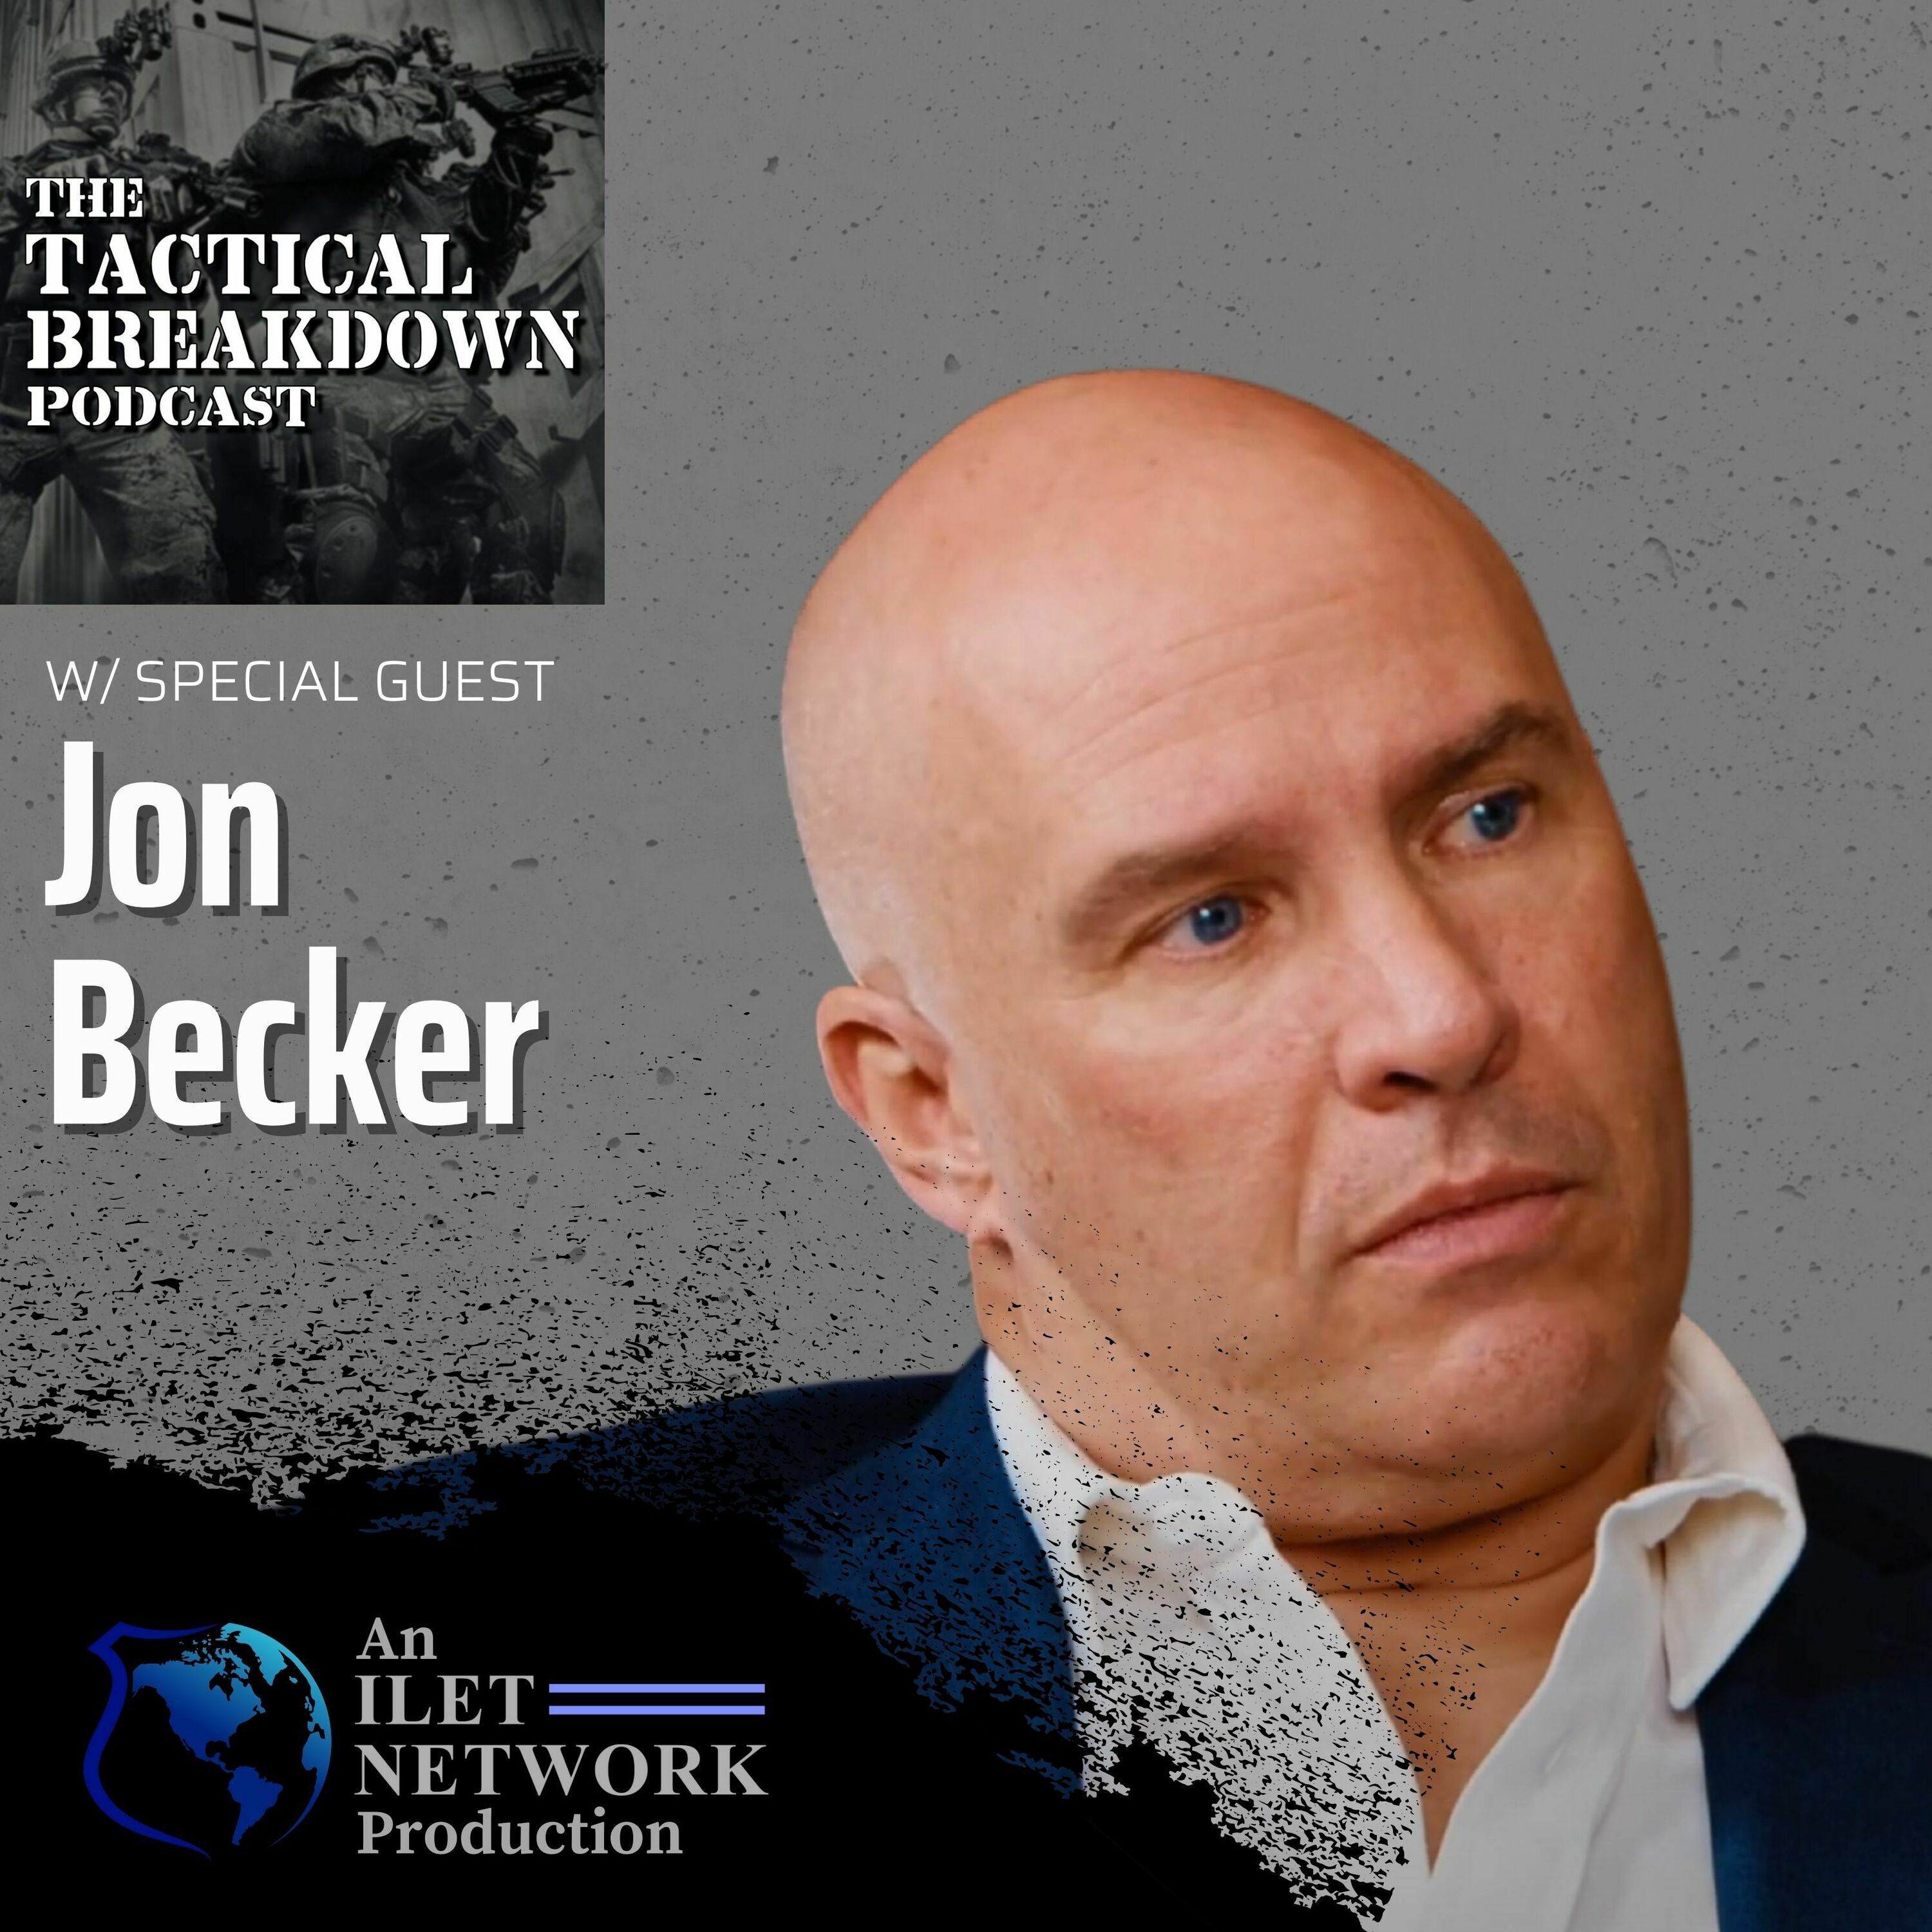 Jon Becker: The Mind Behind The Debrief | A New Podcast for Tactical Operations